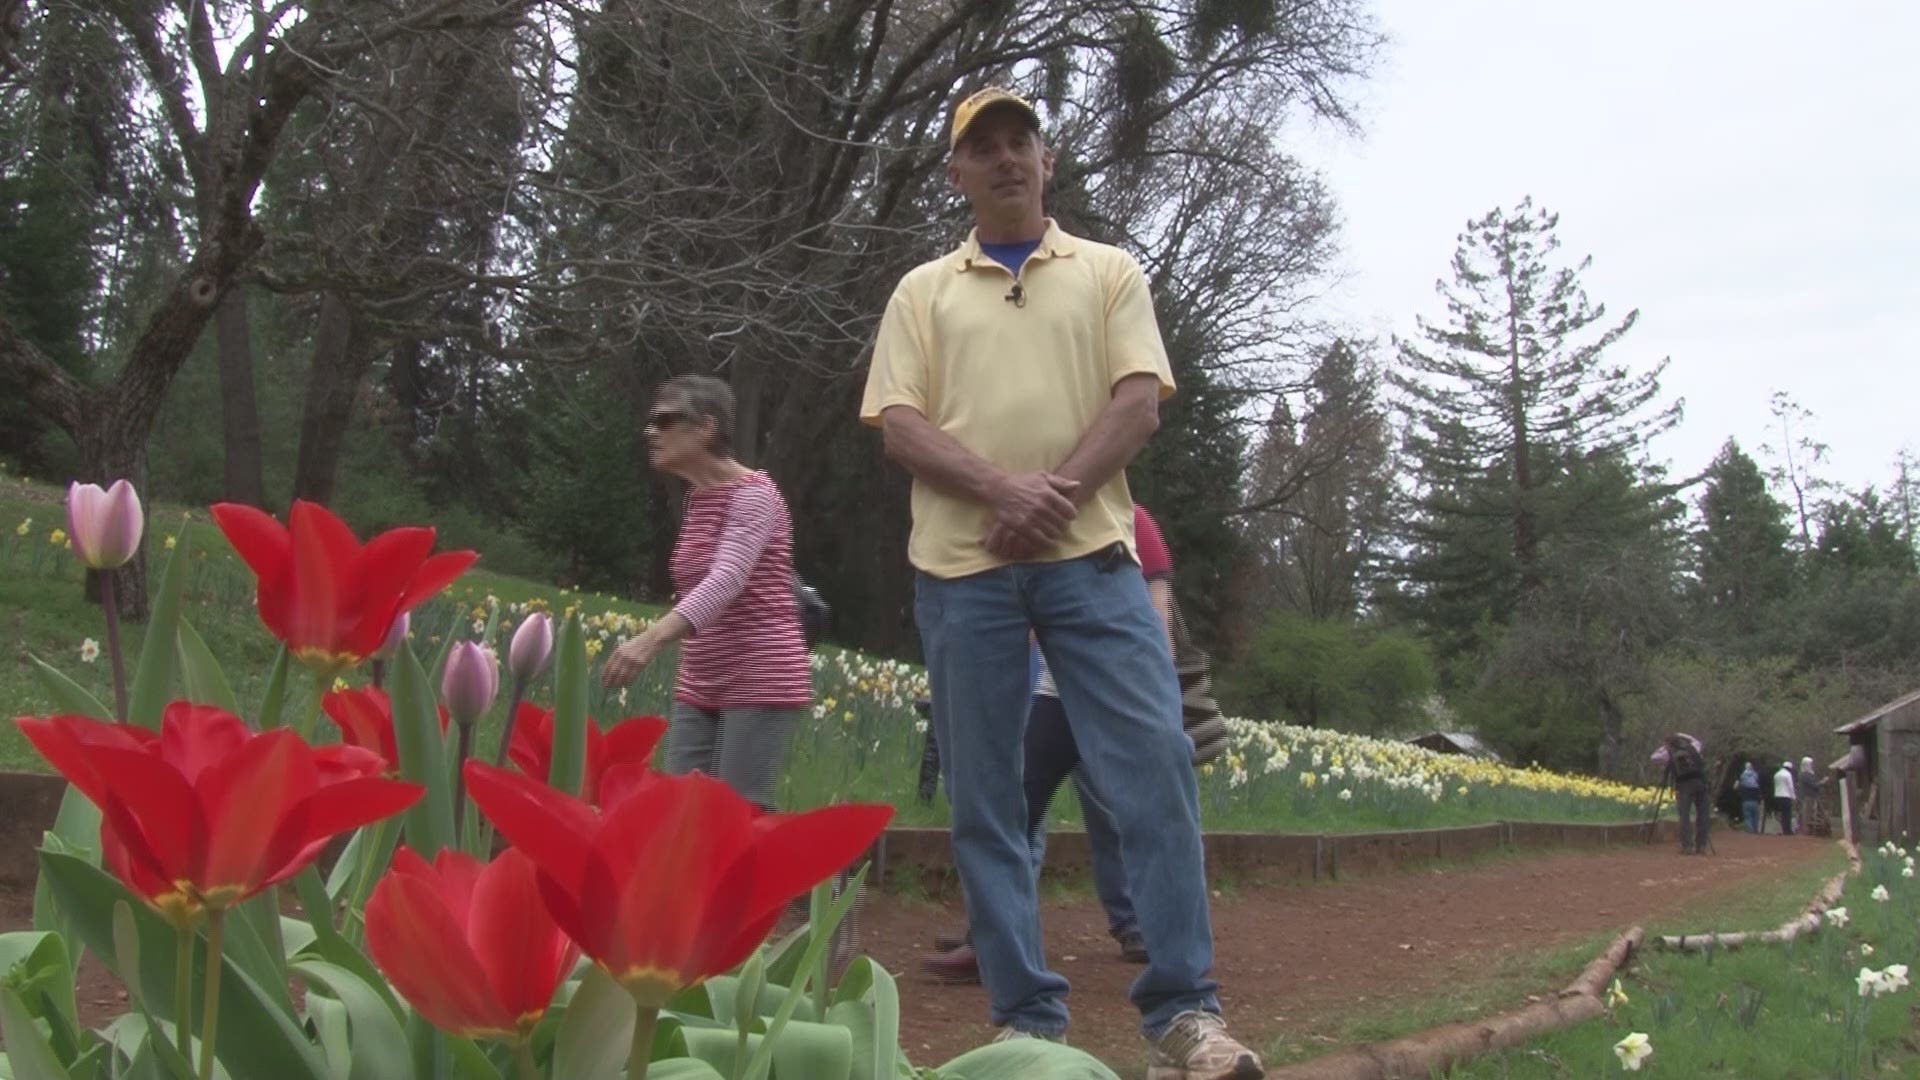 Daffodil Hill draws thousands of visitors most years to Amador County.